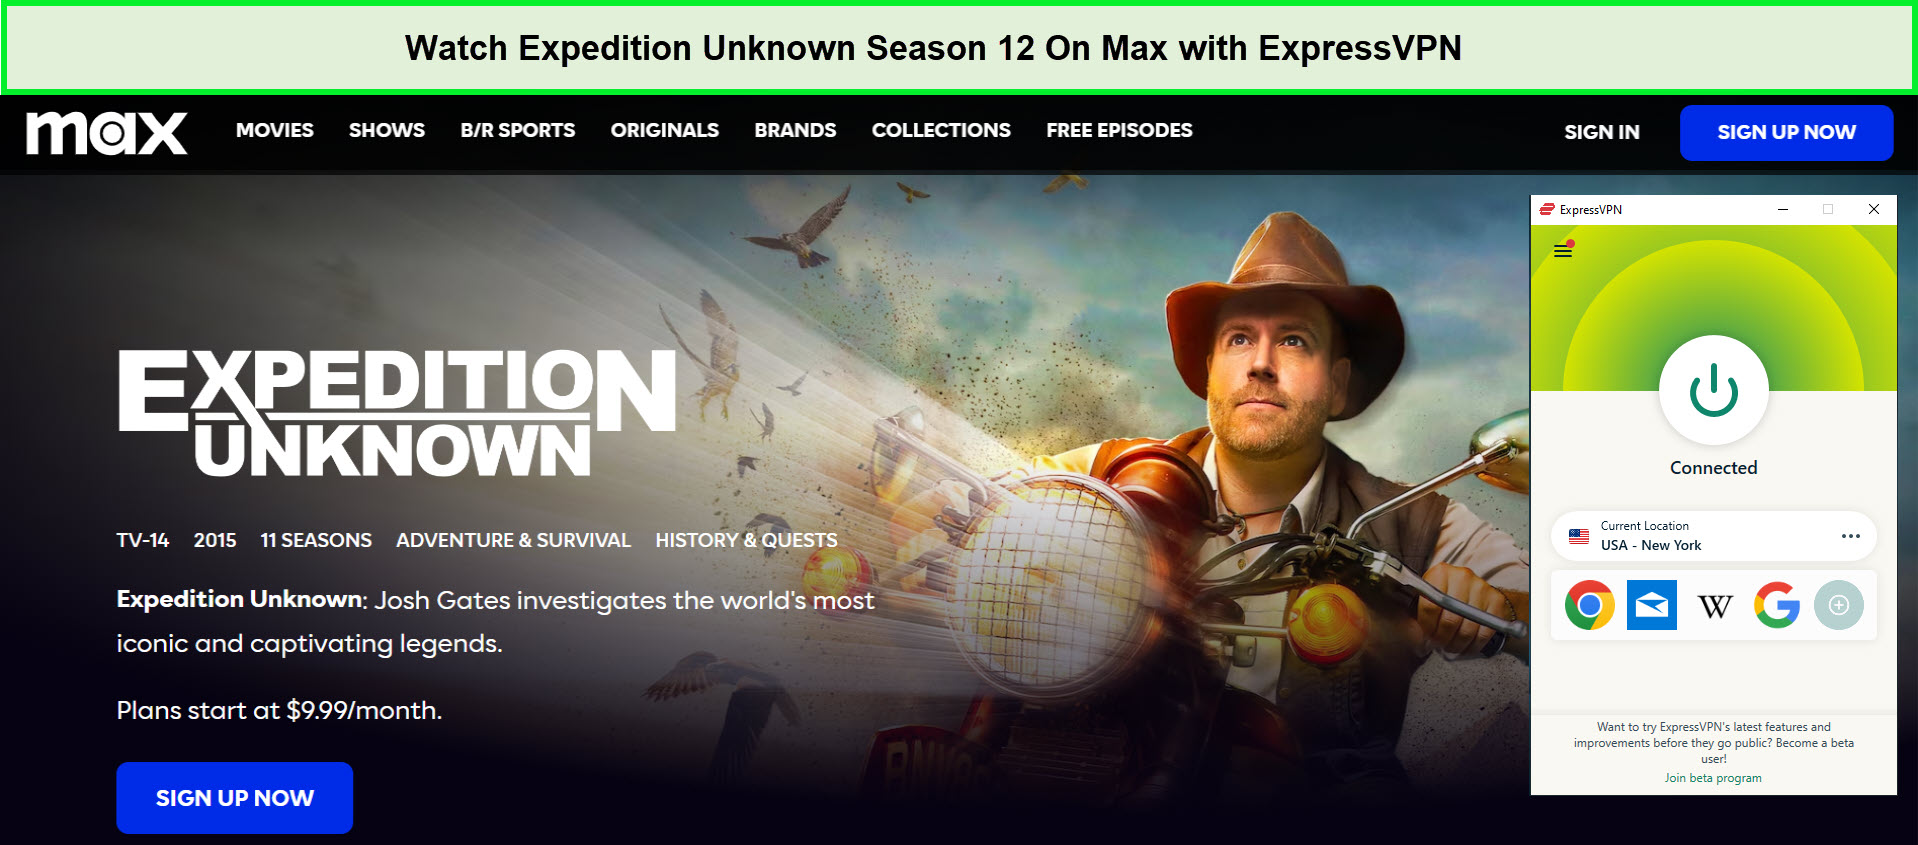 Watch-Expedition-Unknown-Season-12-in-New Zealand-On-Max-with-ExpressVPN